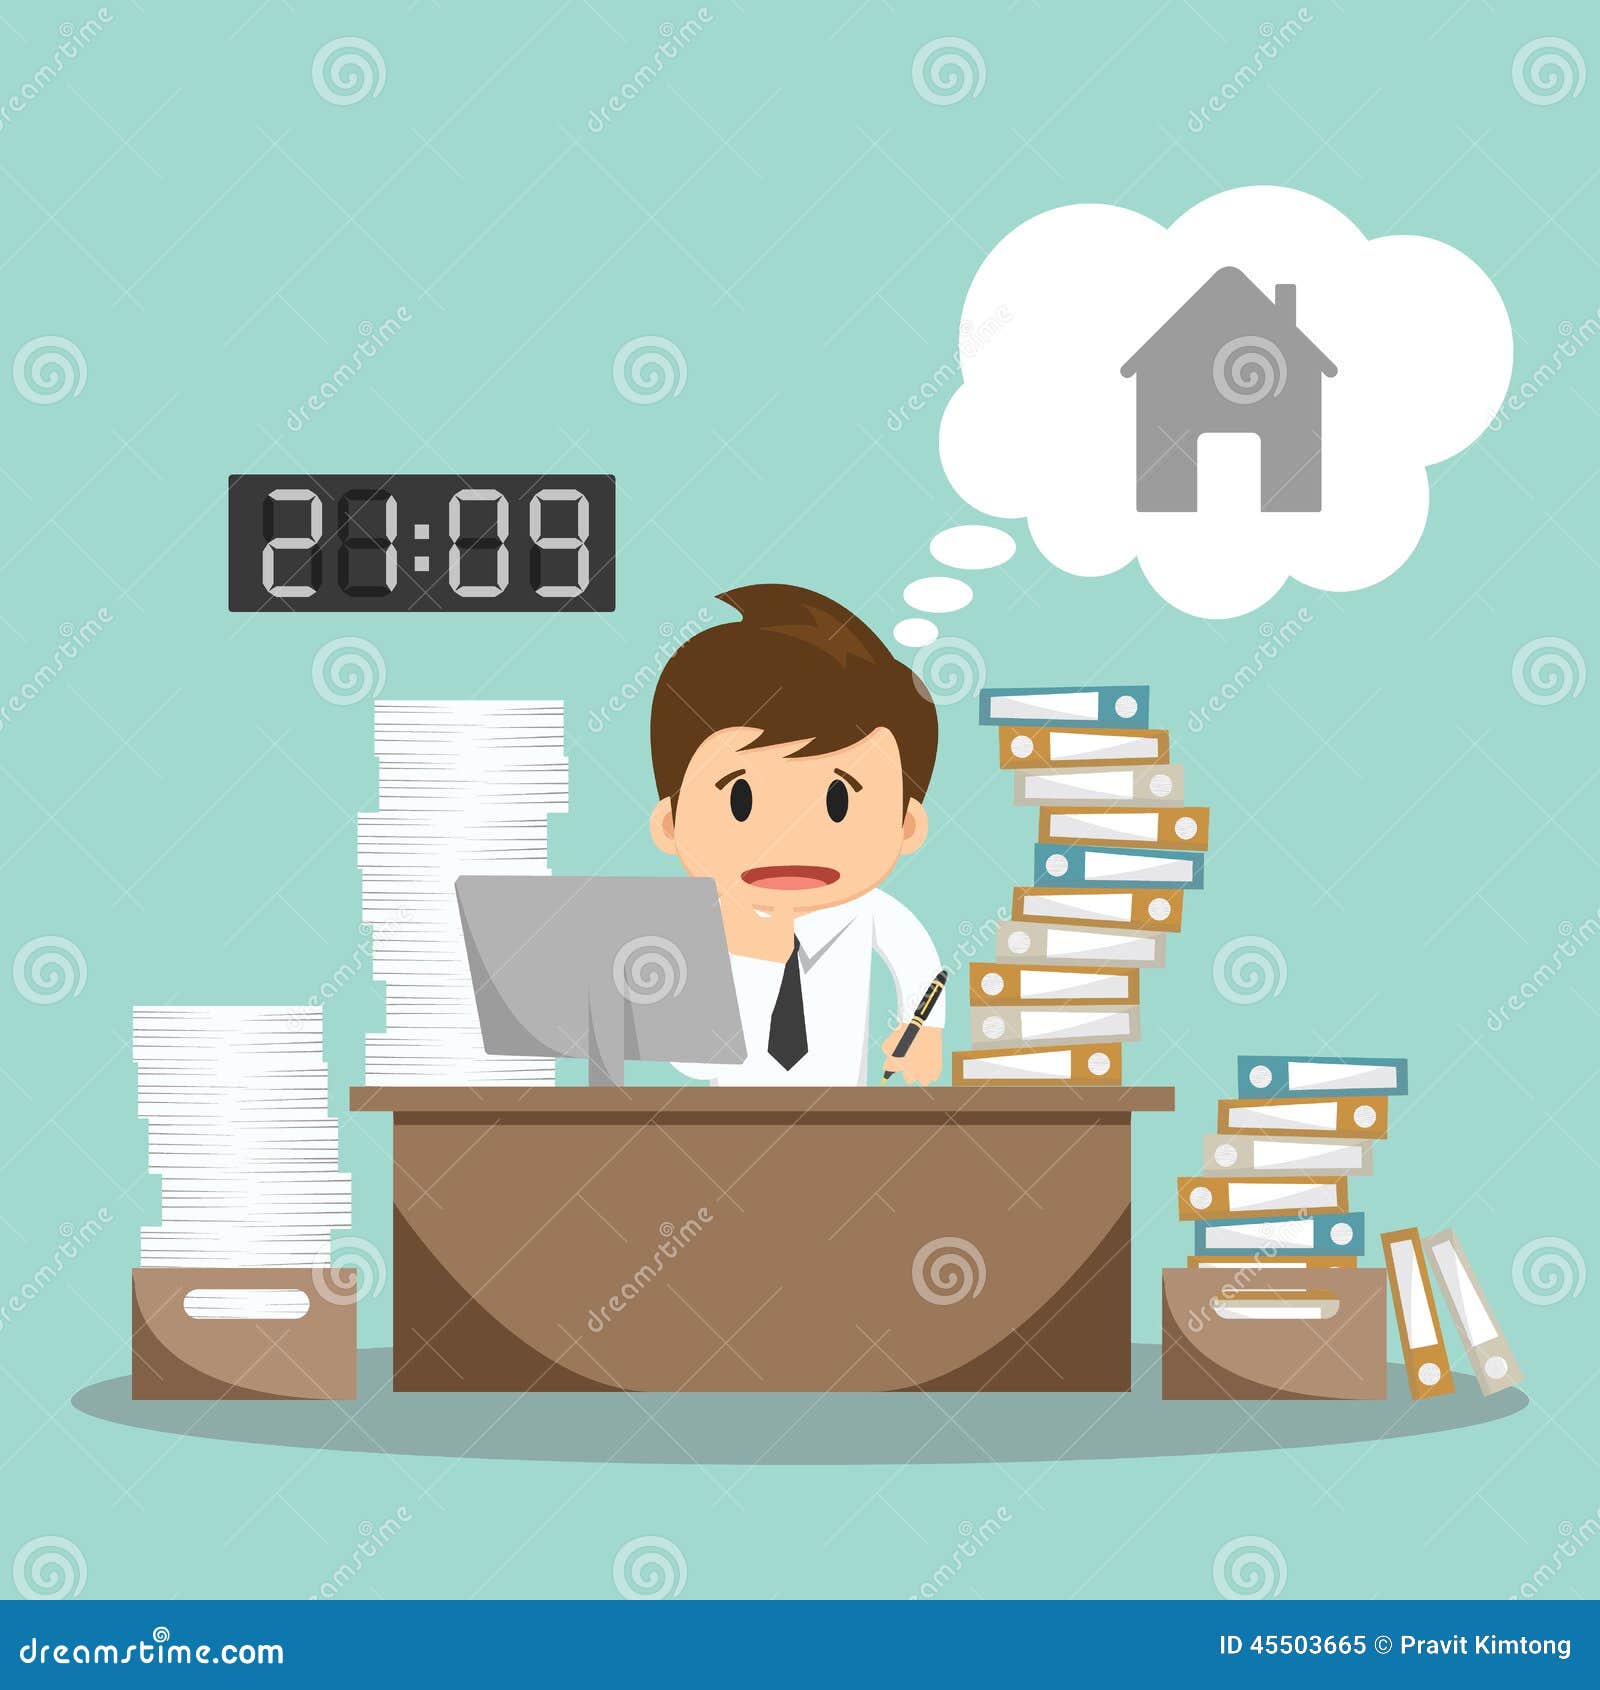 clipart overworked office worker - photo #28